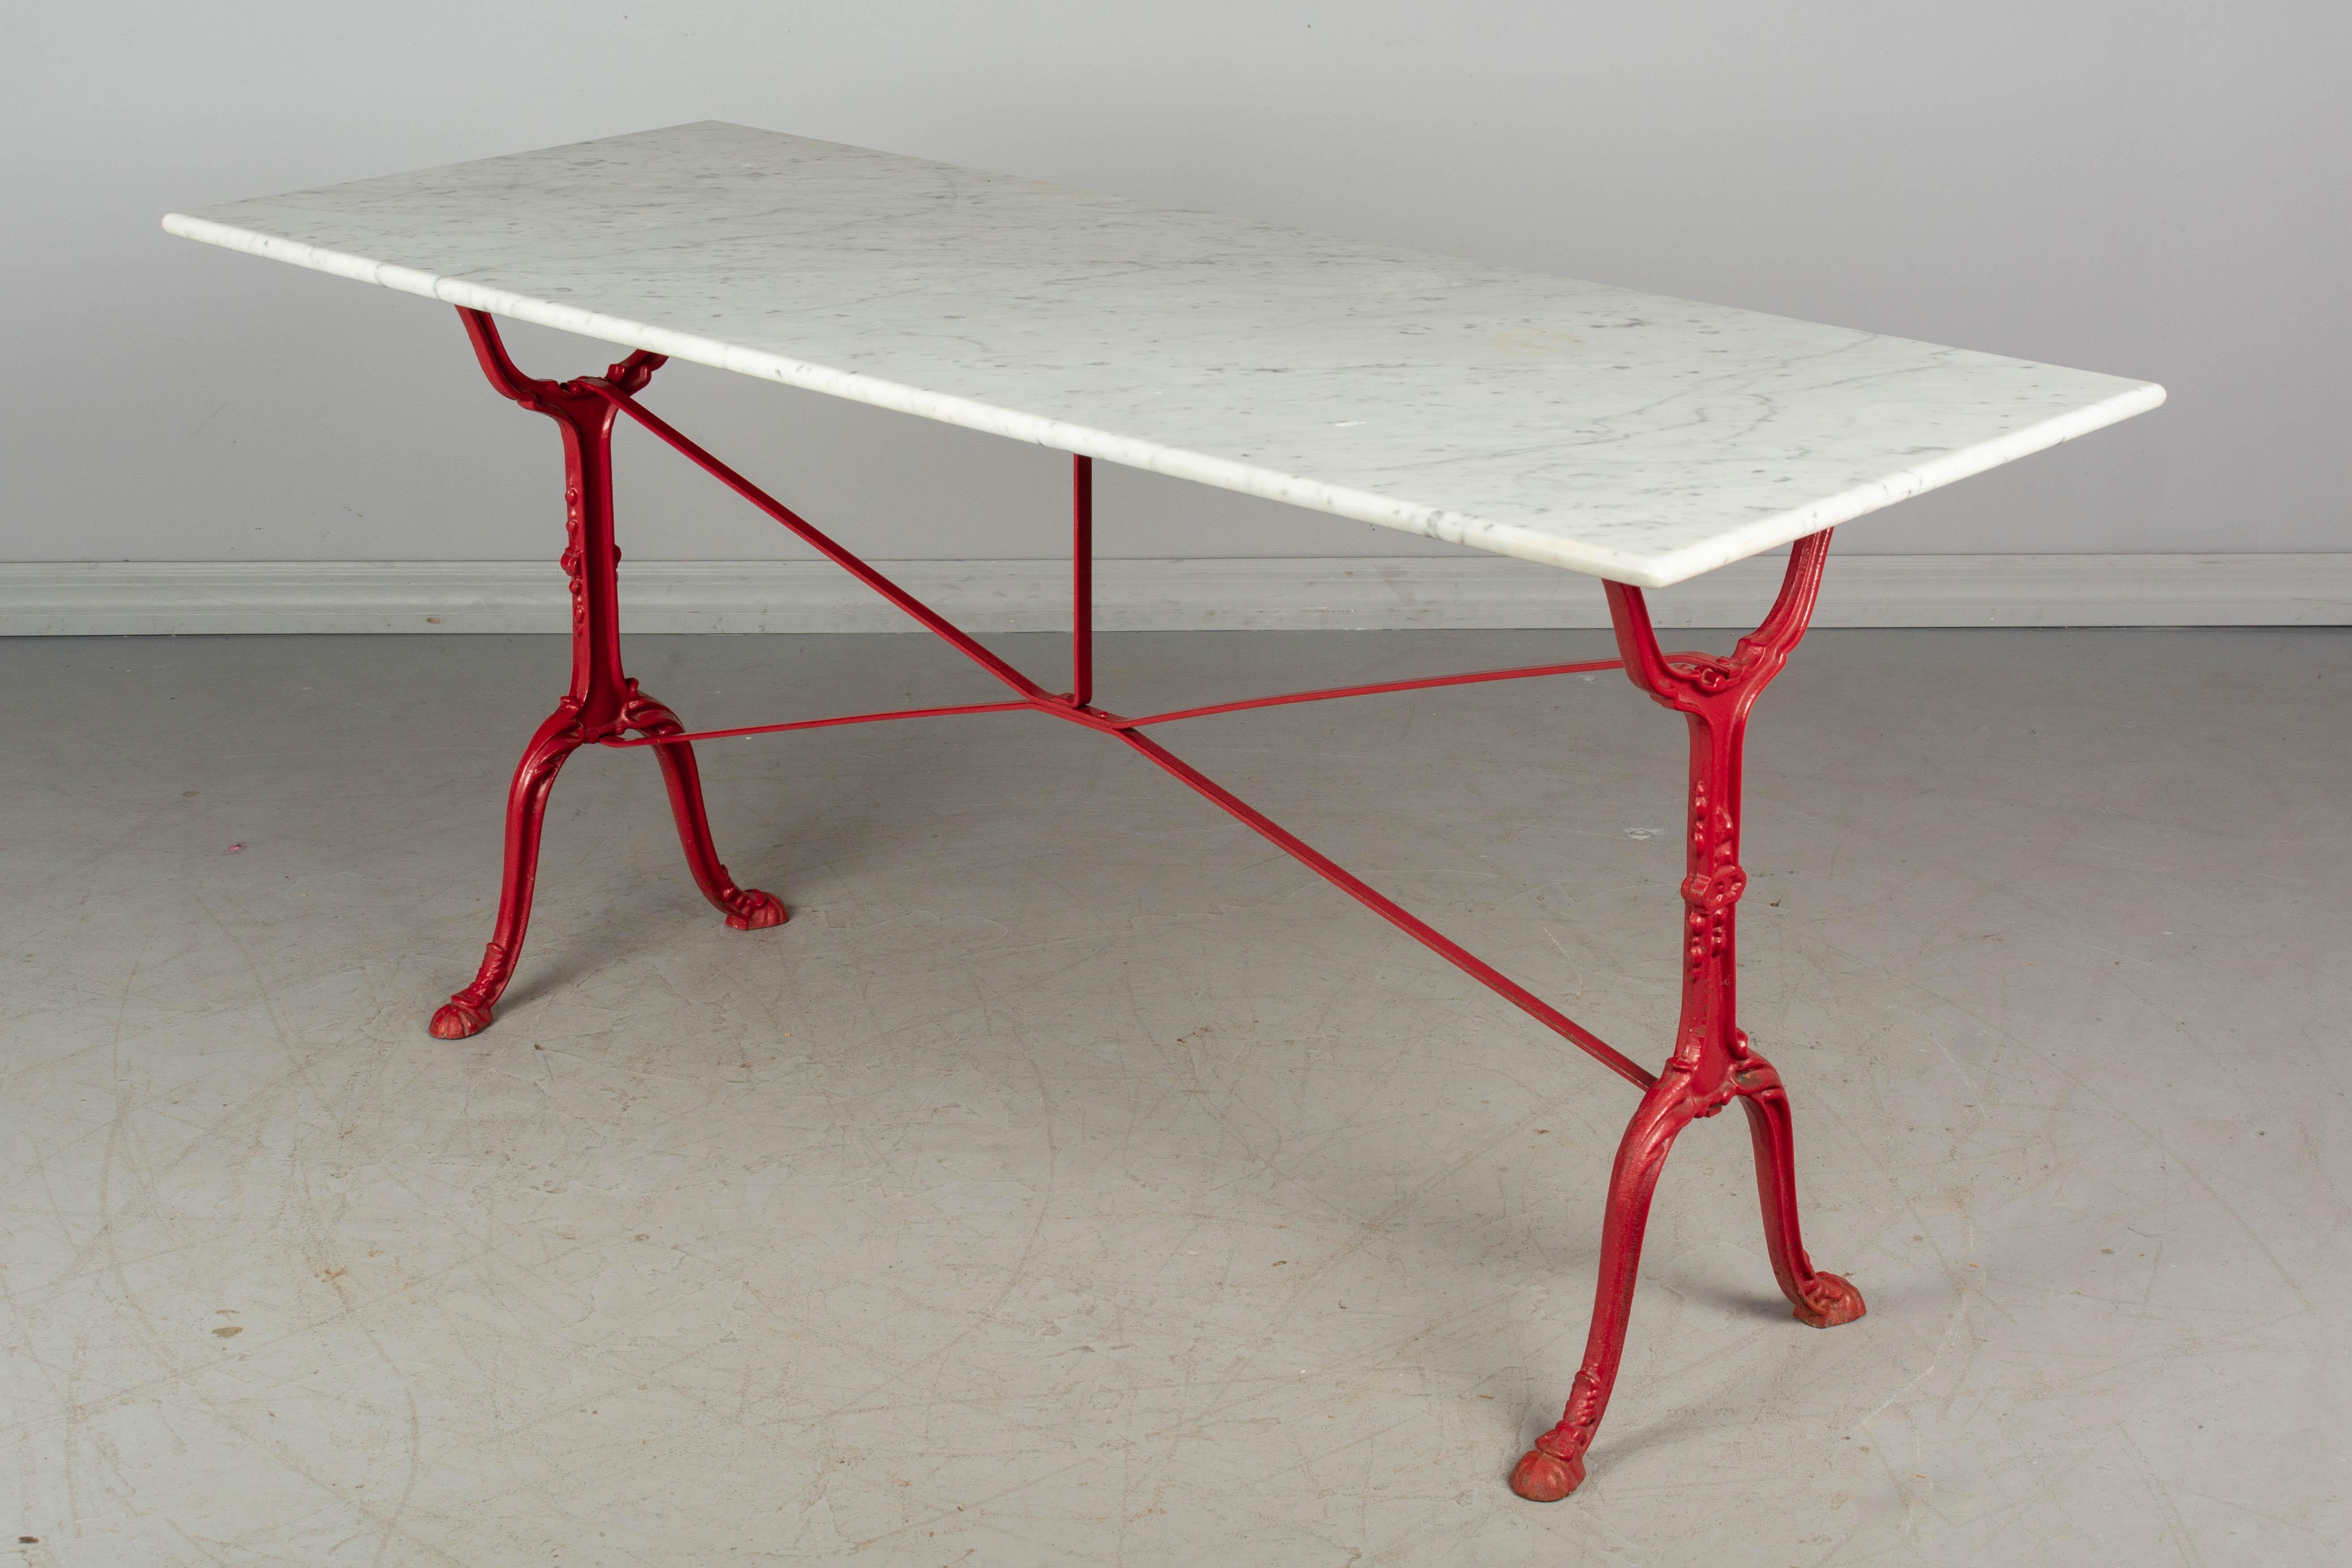 A French cast iron marble top bistro table. Base has bright red painted finish. Large white veined marble top is in good condition with minor wear. Perfect for outdoor use.